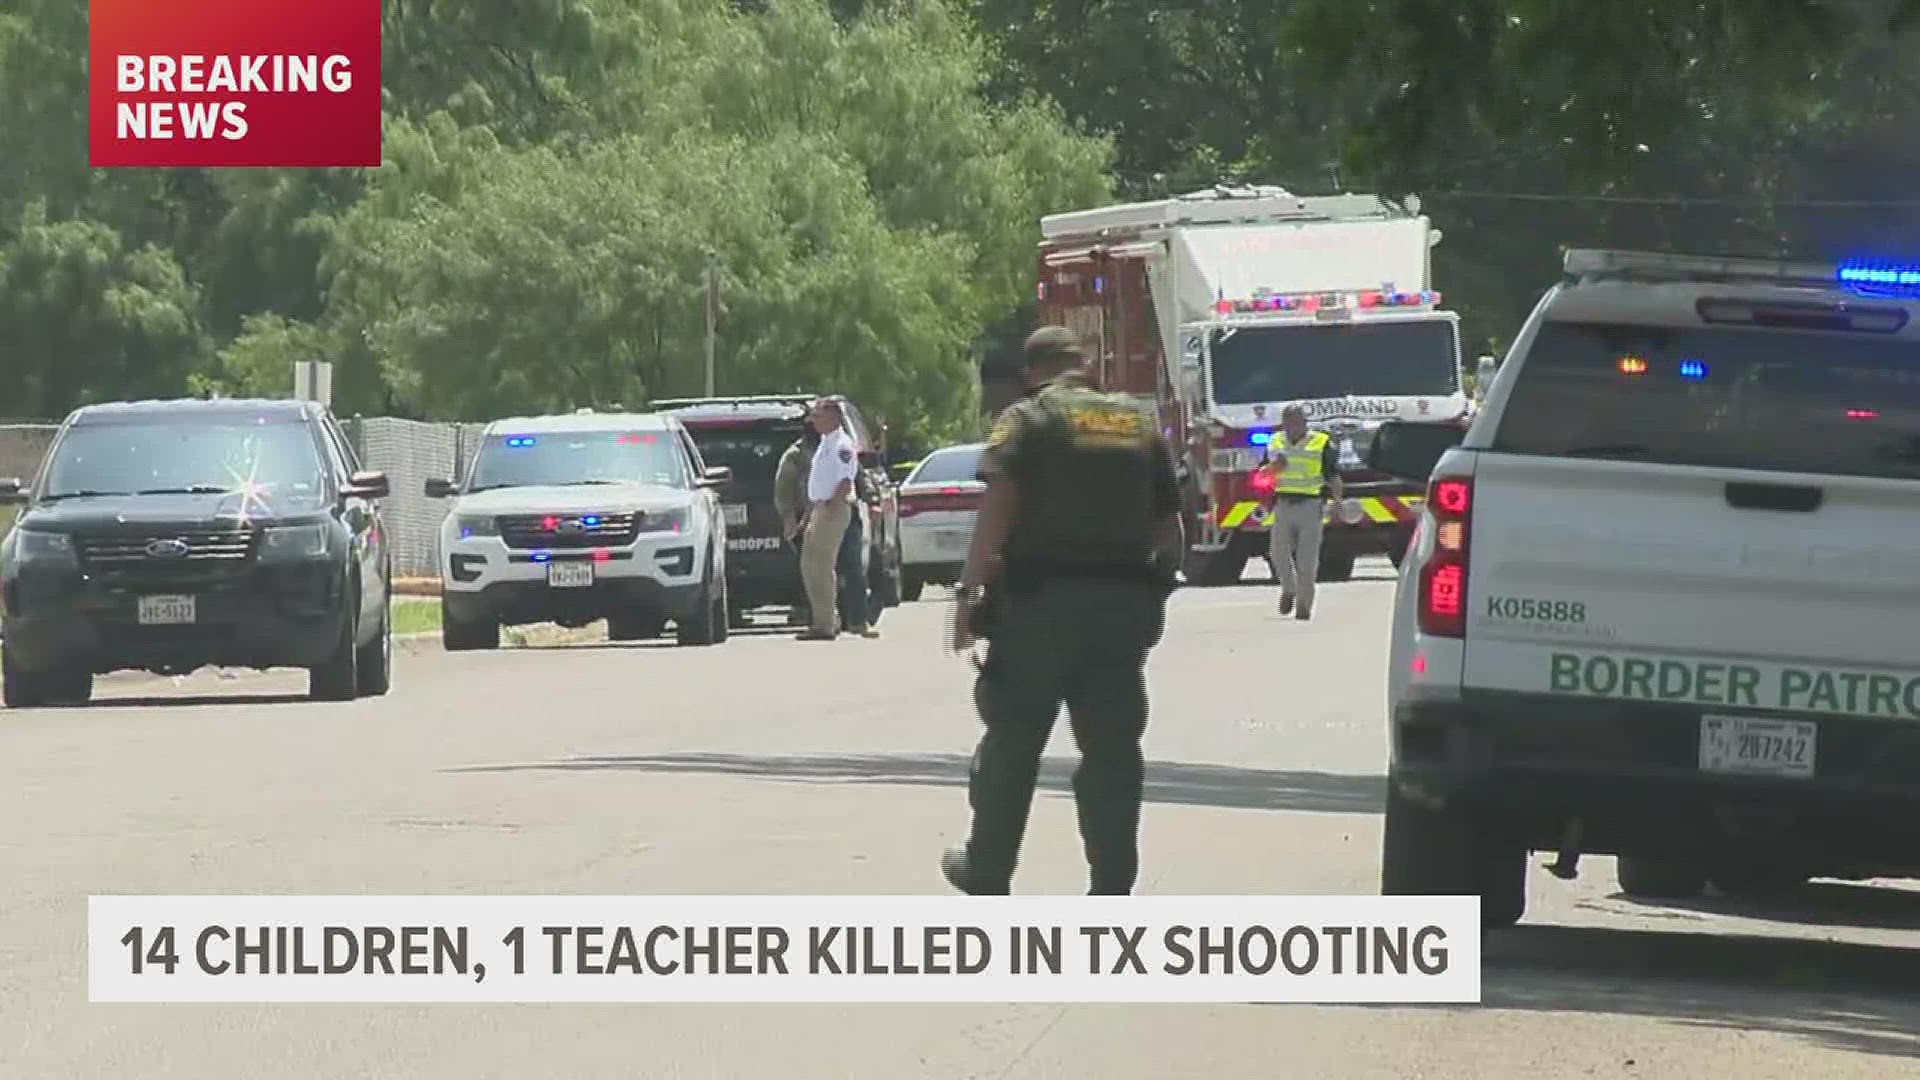 The 'active shooter' was reported shortly after noon at the school in Uvalde, which is about 80 miles west of San Antonio.